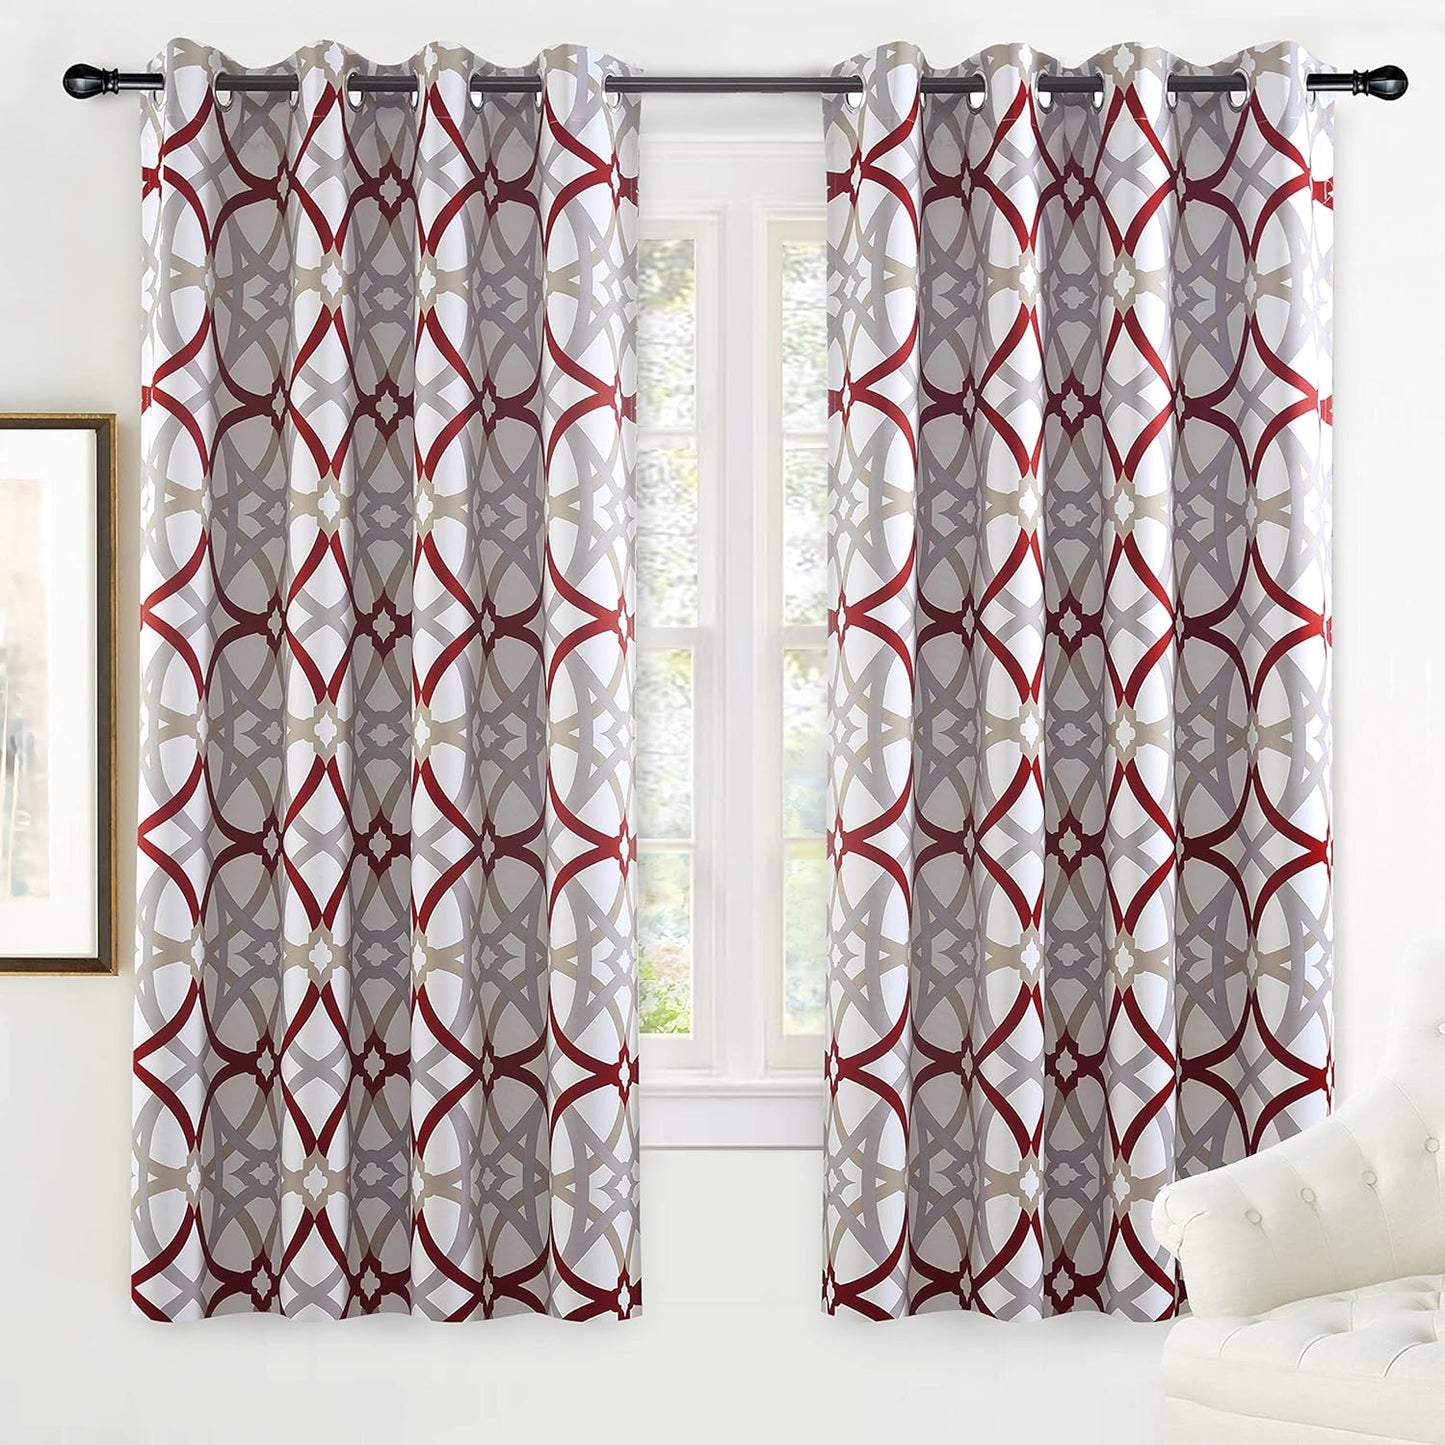 Driftaway Alexander Thermal Blackout Grommet Unlined Window Curtains Spiral Geo Trellis Pattern Set of 2 Panels Each Size 52 Inch by 84 Inch Red and Gray  DriftAway Red/Gray 52"X72" 